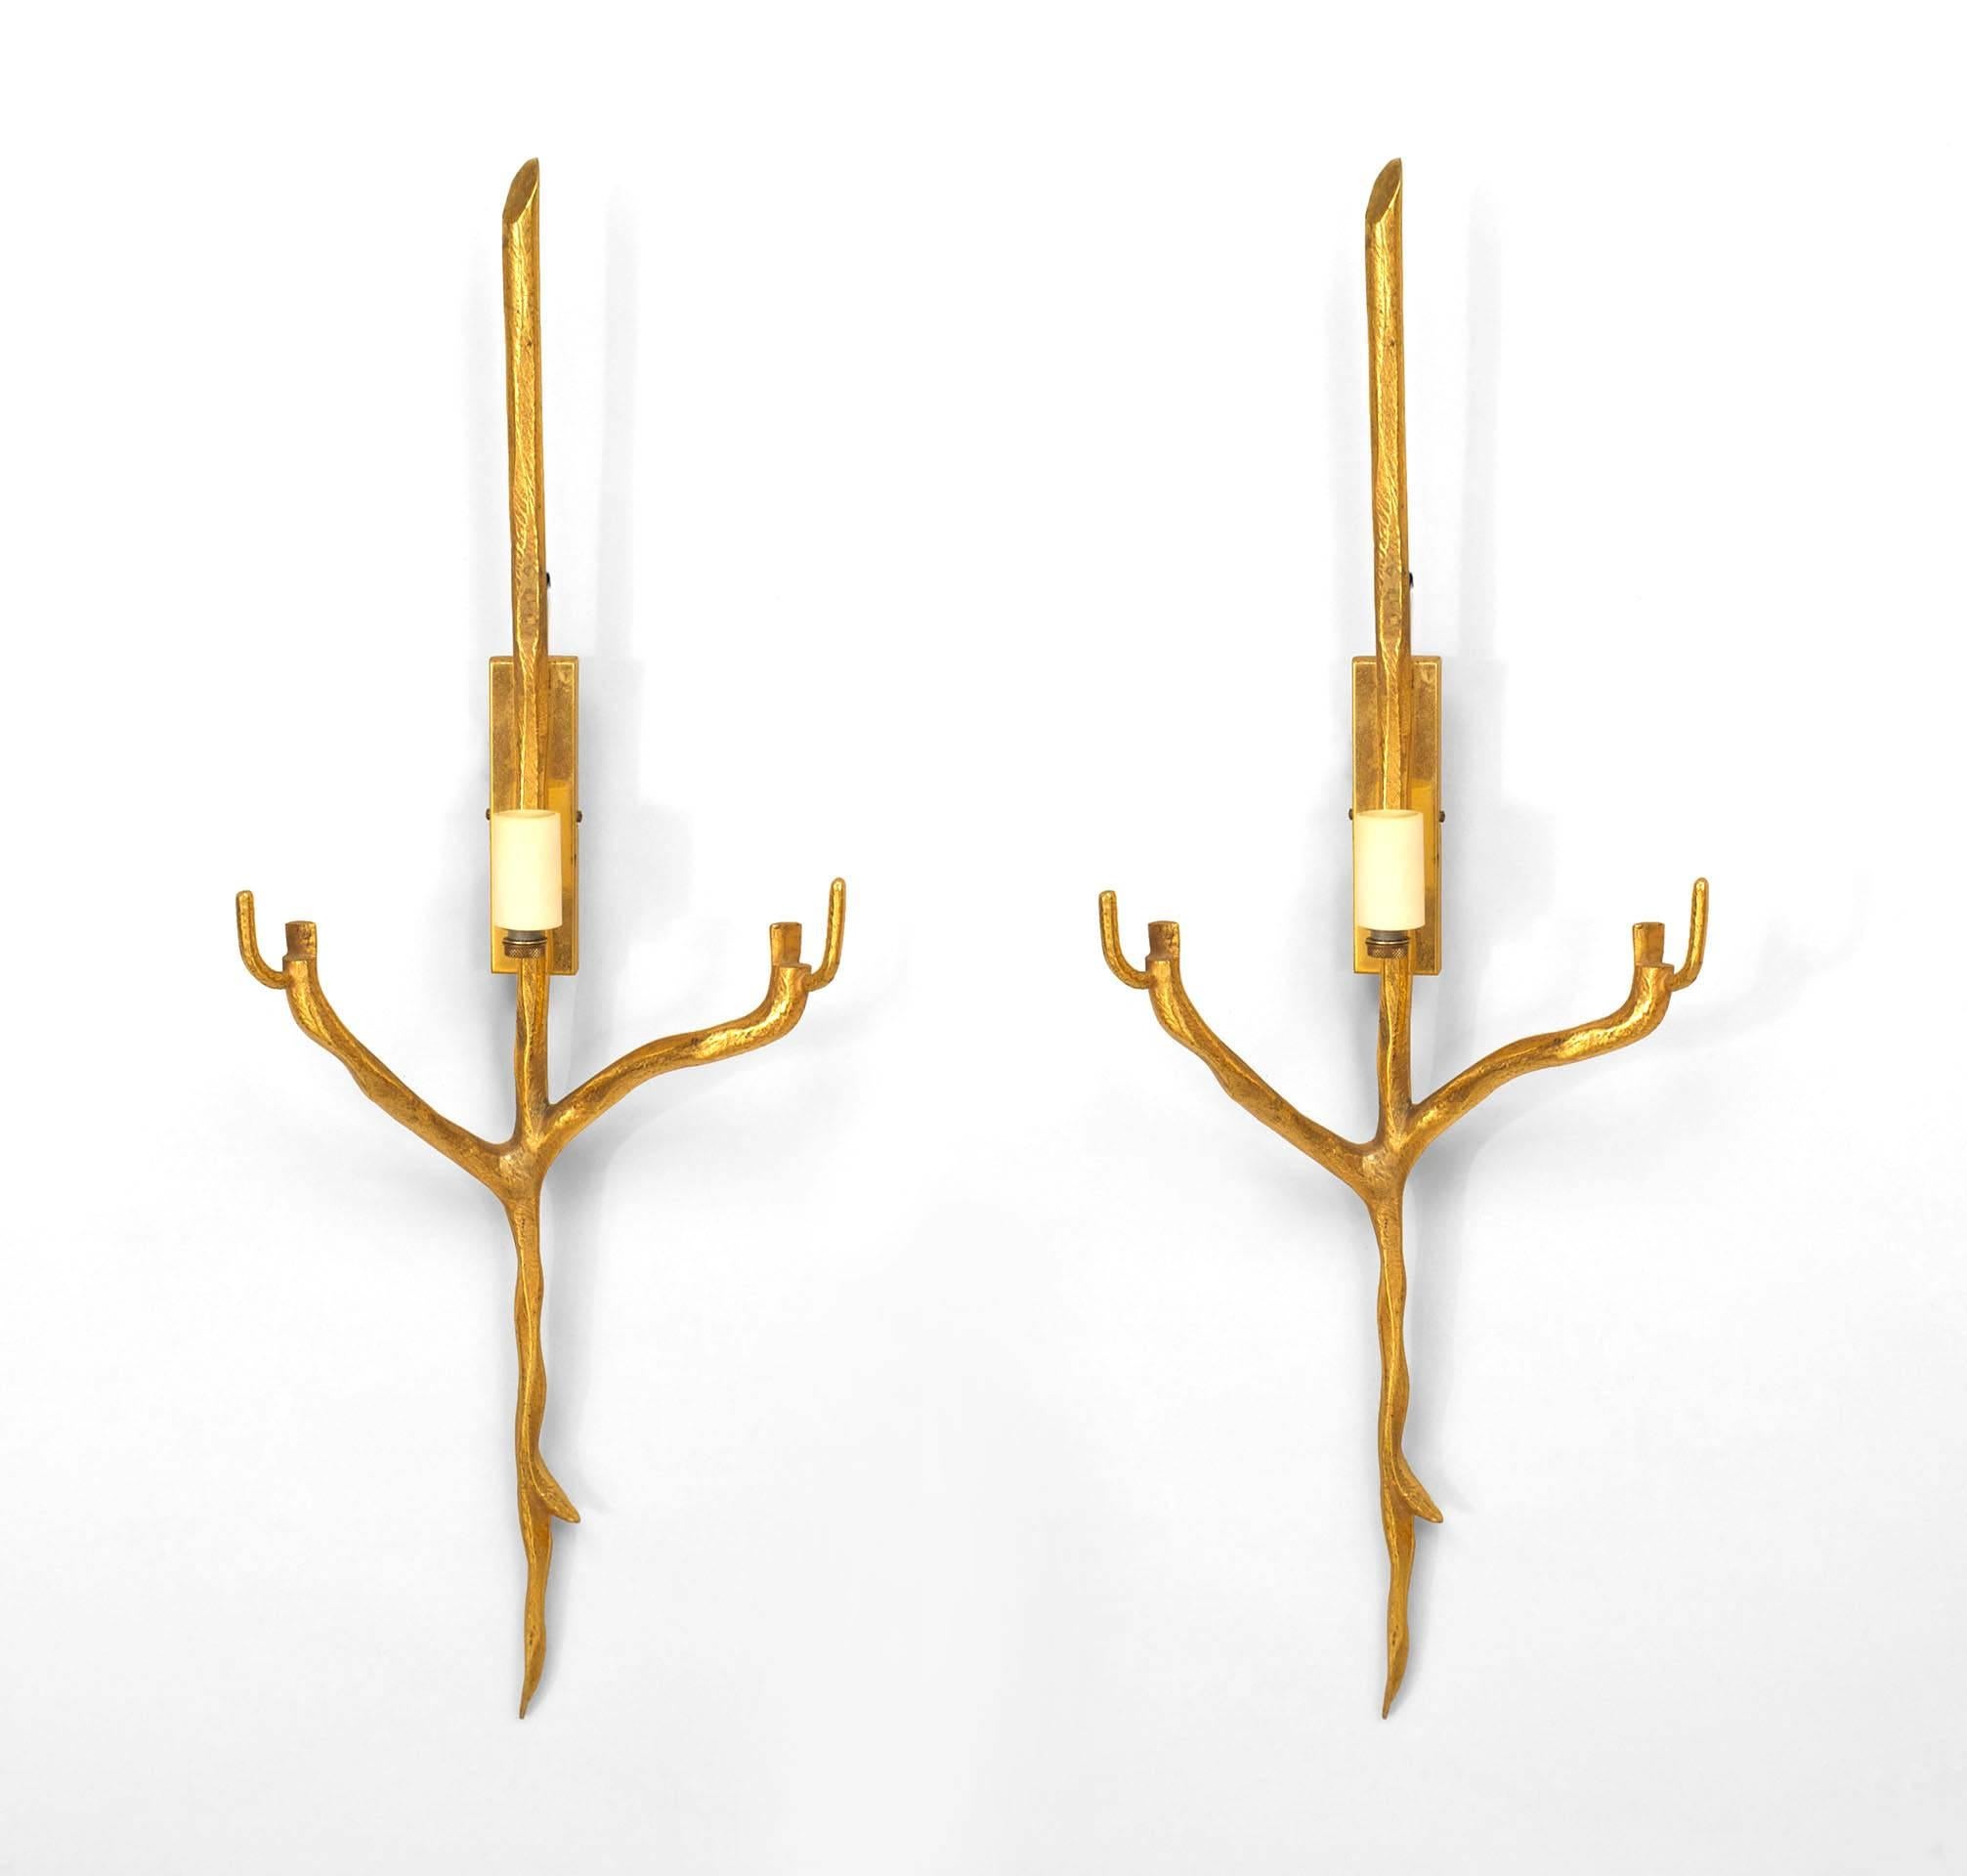 Pair of Italian Post-War gilt bronze wall sconces with a single arm, naturalistic design, and two twig-shaped brackets to support a shade. (AGOSTINI) (PRICED AS Pair)
